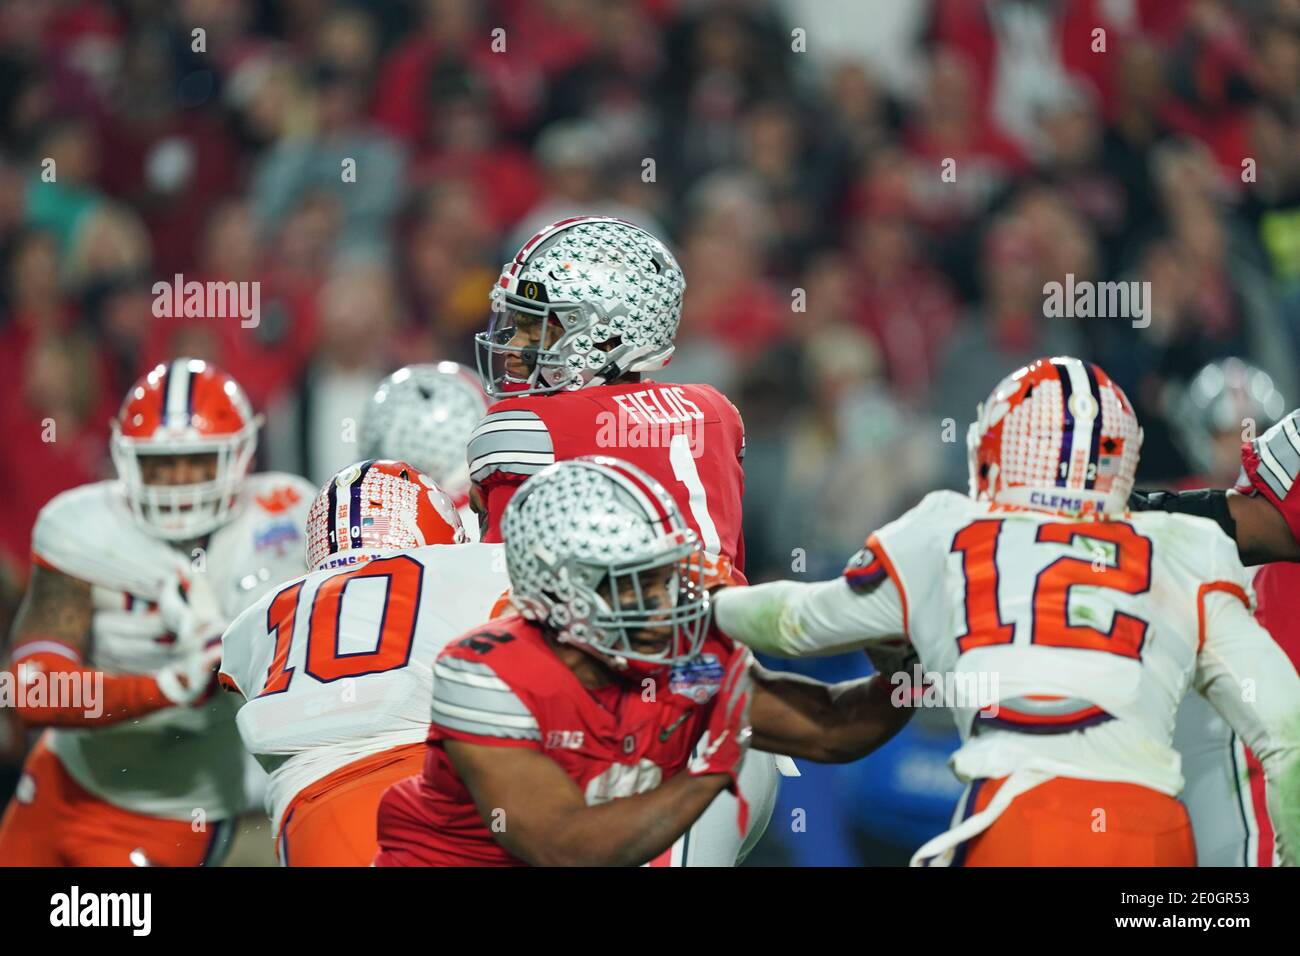 Glendale, AZ, USA. 28th Dec, 2019. Ohio State Buckeyes quarterback (1) Justin Fields finds the open field and runs the ball versus the Clemson Tigers, at the PlayStation Fiesta Bowl, at State Farm stadium, in Glendale, AZ., On December 28, 2019. (Absolute Complete Photographer & Company Credit: Jose Marin/SonyPro/MarinMedia.org/CSM ) (HOLLYWOOD LIFE OUT, SHUTTERSTOCK OUT, LAS VEGAS RAIDERS OUT). Credit: csm/Alamy Live News Stock Photo